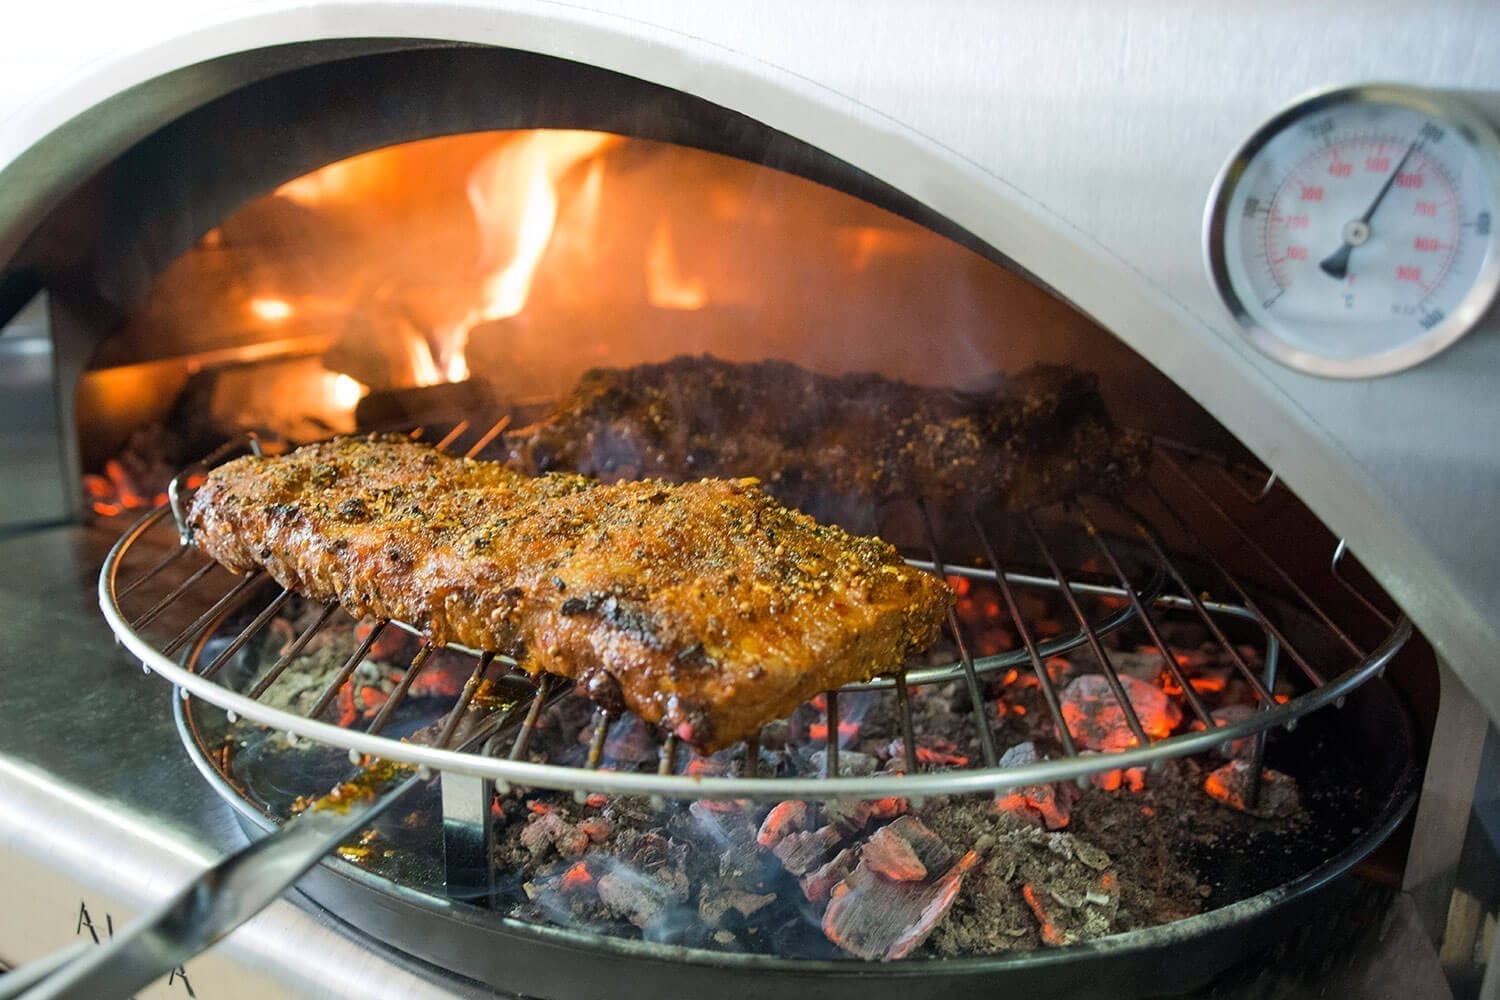 https://www.alfaforni.com/wp-content/uploads/2019/09/bbq500-grill-with-oven-outdoor-cooking-not-only-pizza.jpg